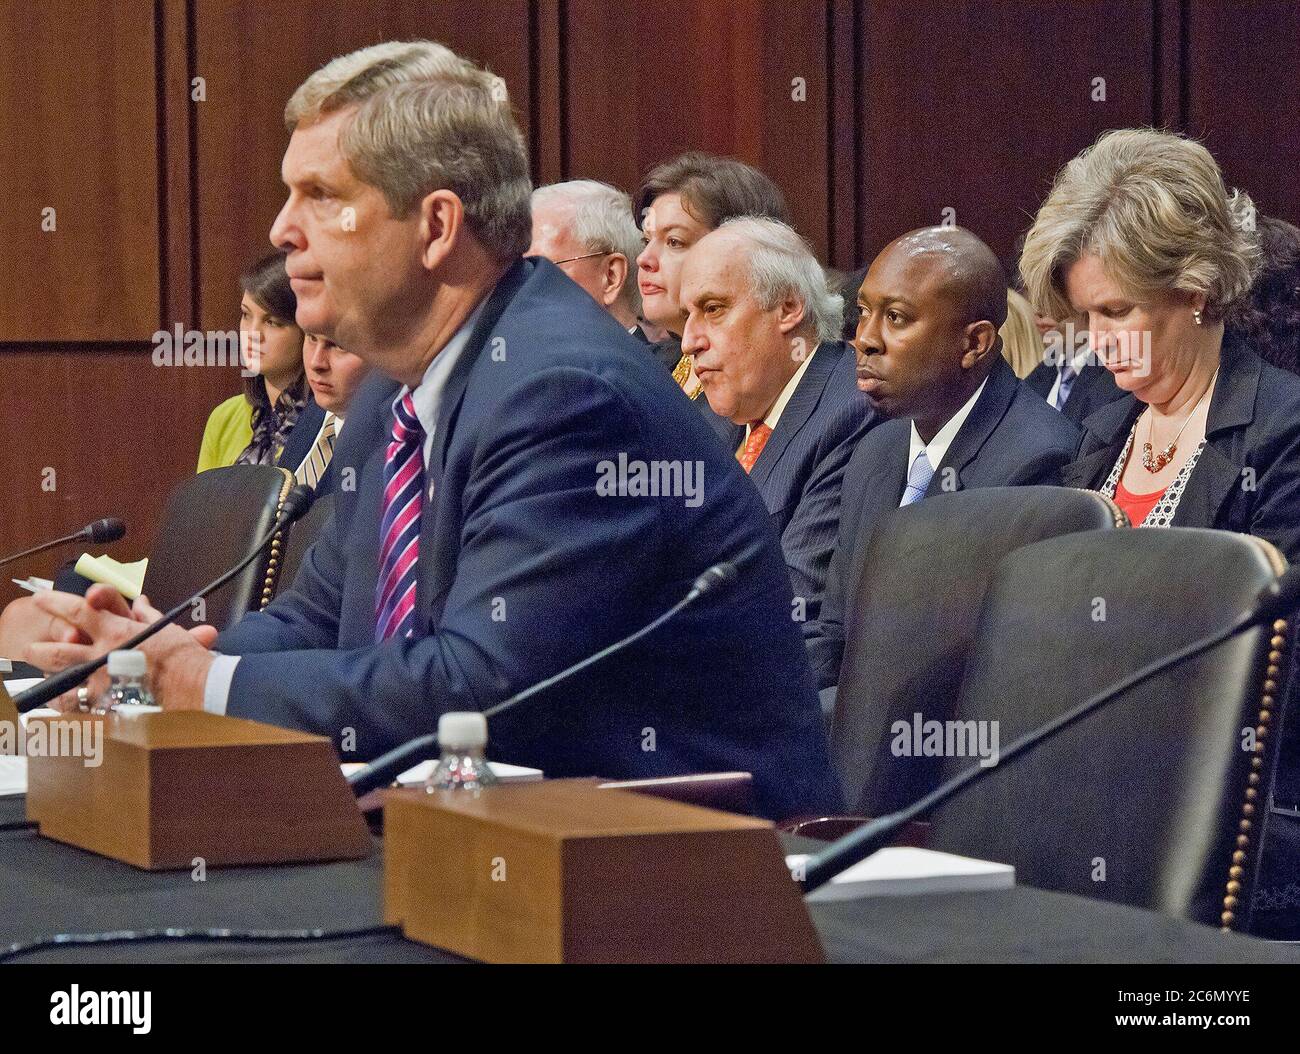 Agriculture Secretary Tom Vilsack visited the Senate Committee on Agriculture, Nutrition and Forestry, in Washington, DC, Thur., May 26, 2011.  to discuss the next Farm Bill. Directly behind Secretary Vilsack are from left: former Secretary Dan Glickman, Karis Gutter, Acting Deputy Undersecretary, Farm and Foreign Agricultural Service and Susan Palmeri, Acting Assistant Secretary, Congressional Relations. Secretary Glickman was a member of the witness panel to speak after Secretary Vilsack. The second panel included a farmer and members of marketing, research and academics who discussed the fu Stock Photo